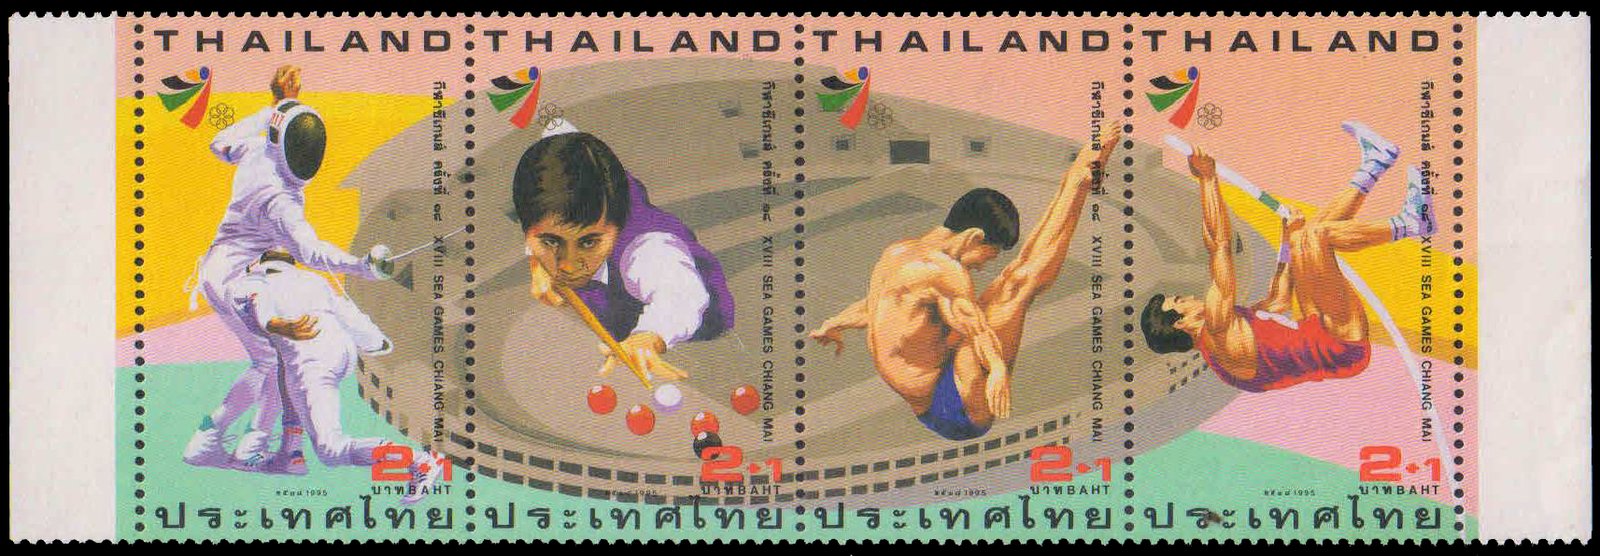 THAILAND 1995-South East Asian Games, Fencing, Snooker, Diving, Pole Valulting, Se-tenant Strip of 4, MNH, S.G. 1816-19